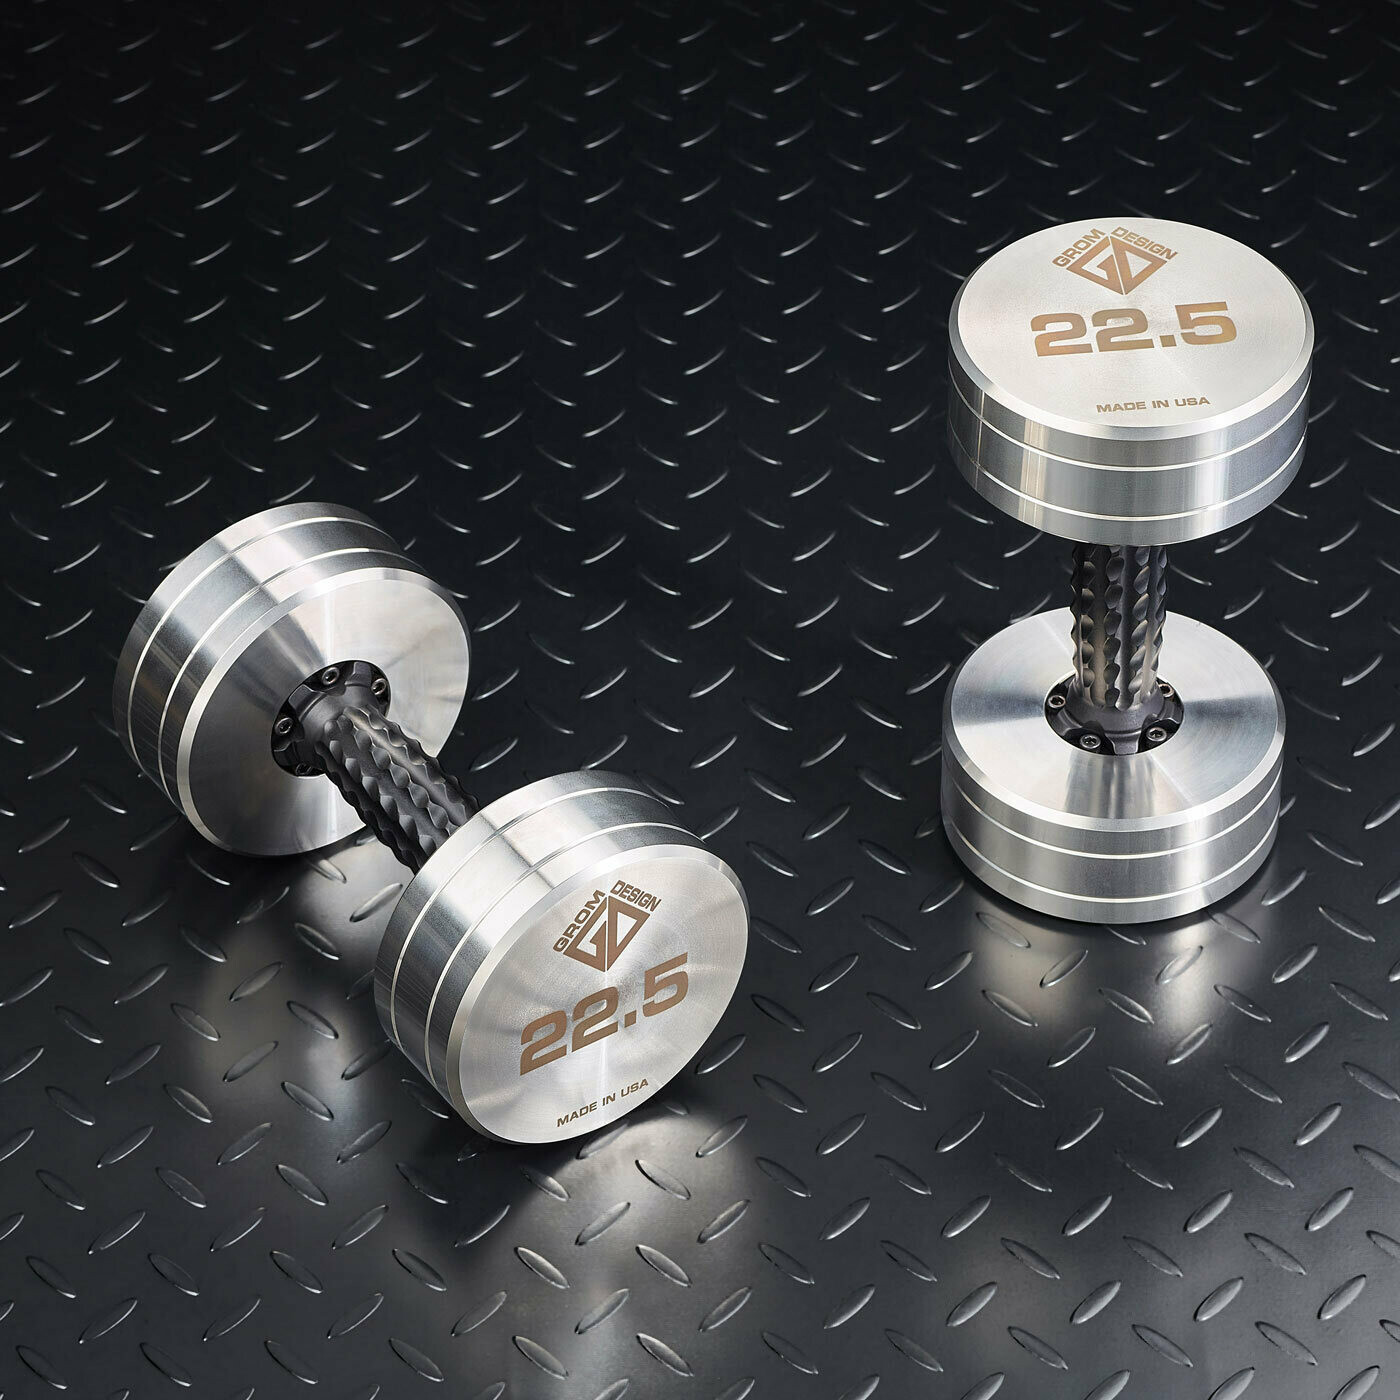 22.5 pound dumbbells Made in USA Stainless Steel CNC Machined